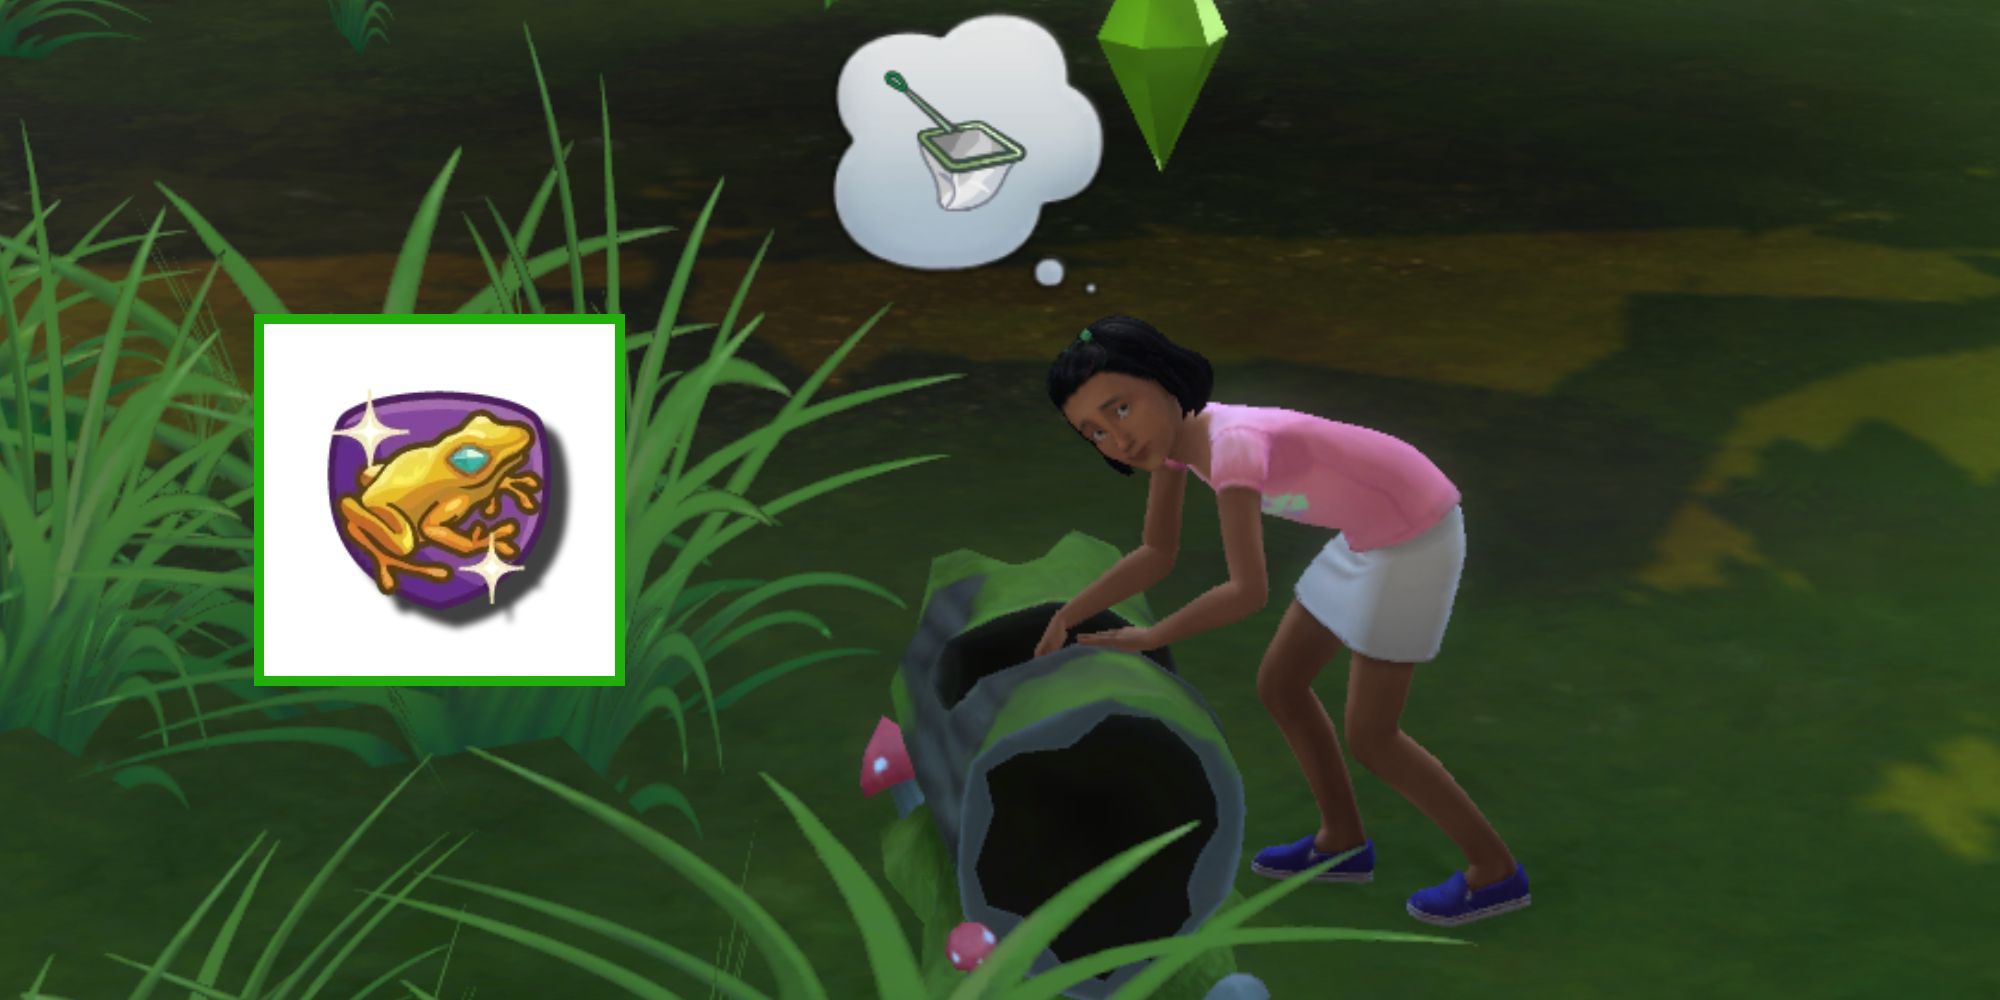 A Sim is searching for frogs to breed in The Sims 4 and a photo of the frog fanatic aspiration has been added